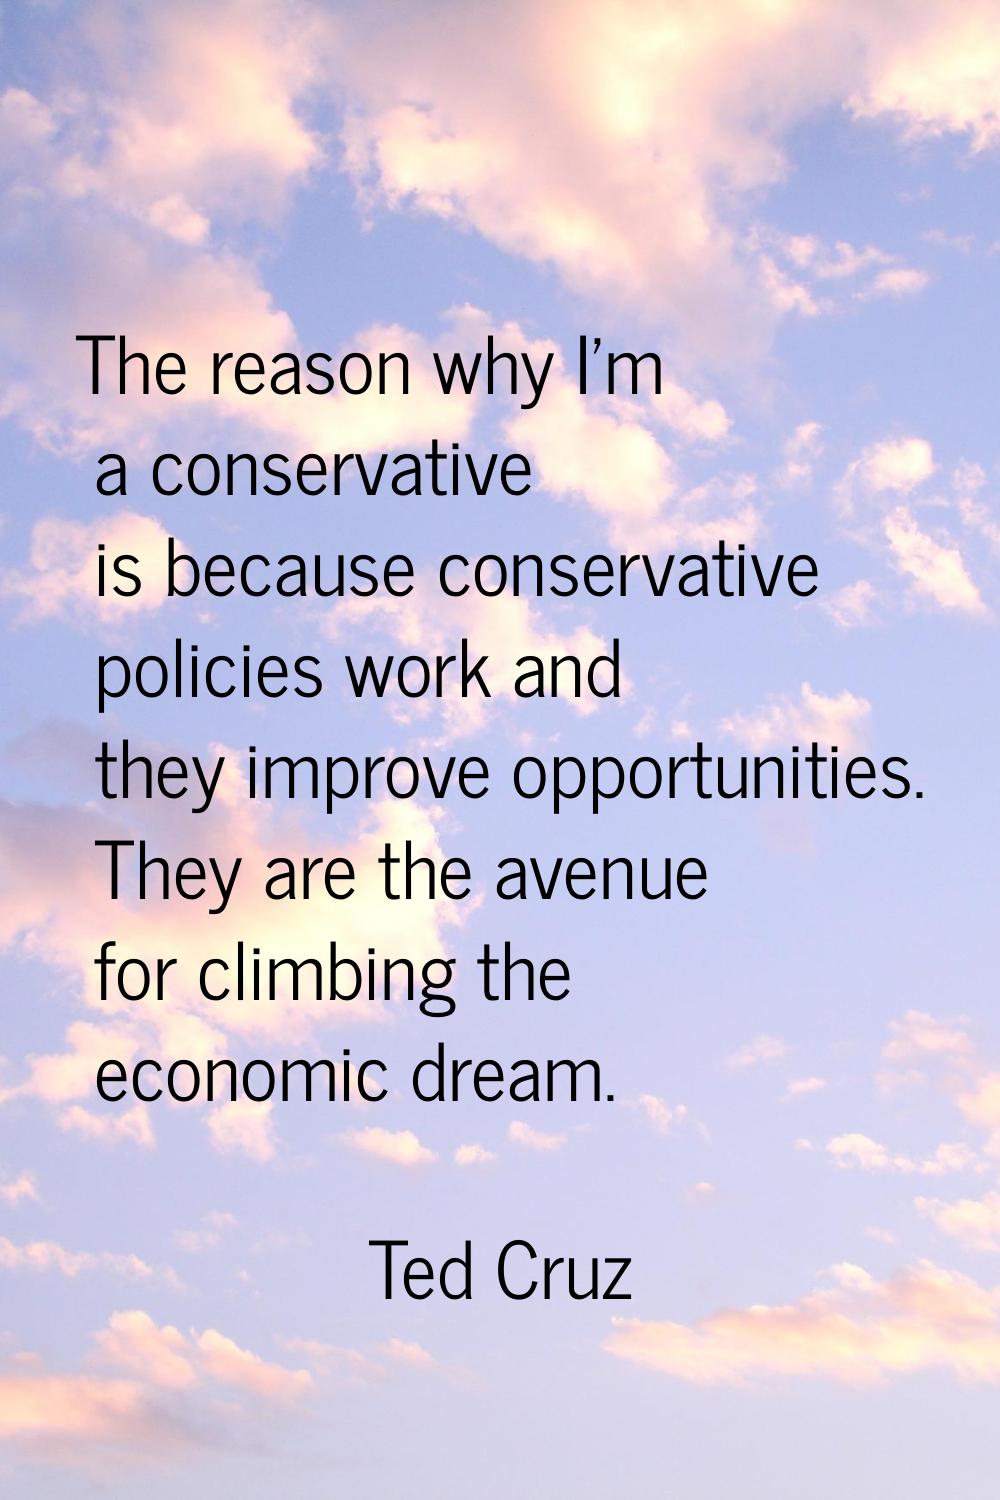 The reason why I'm a conservative is because conservative policies work and they improve opportunit